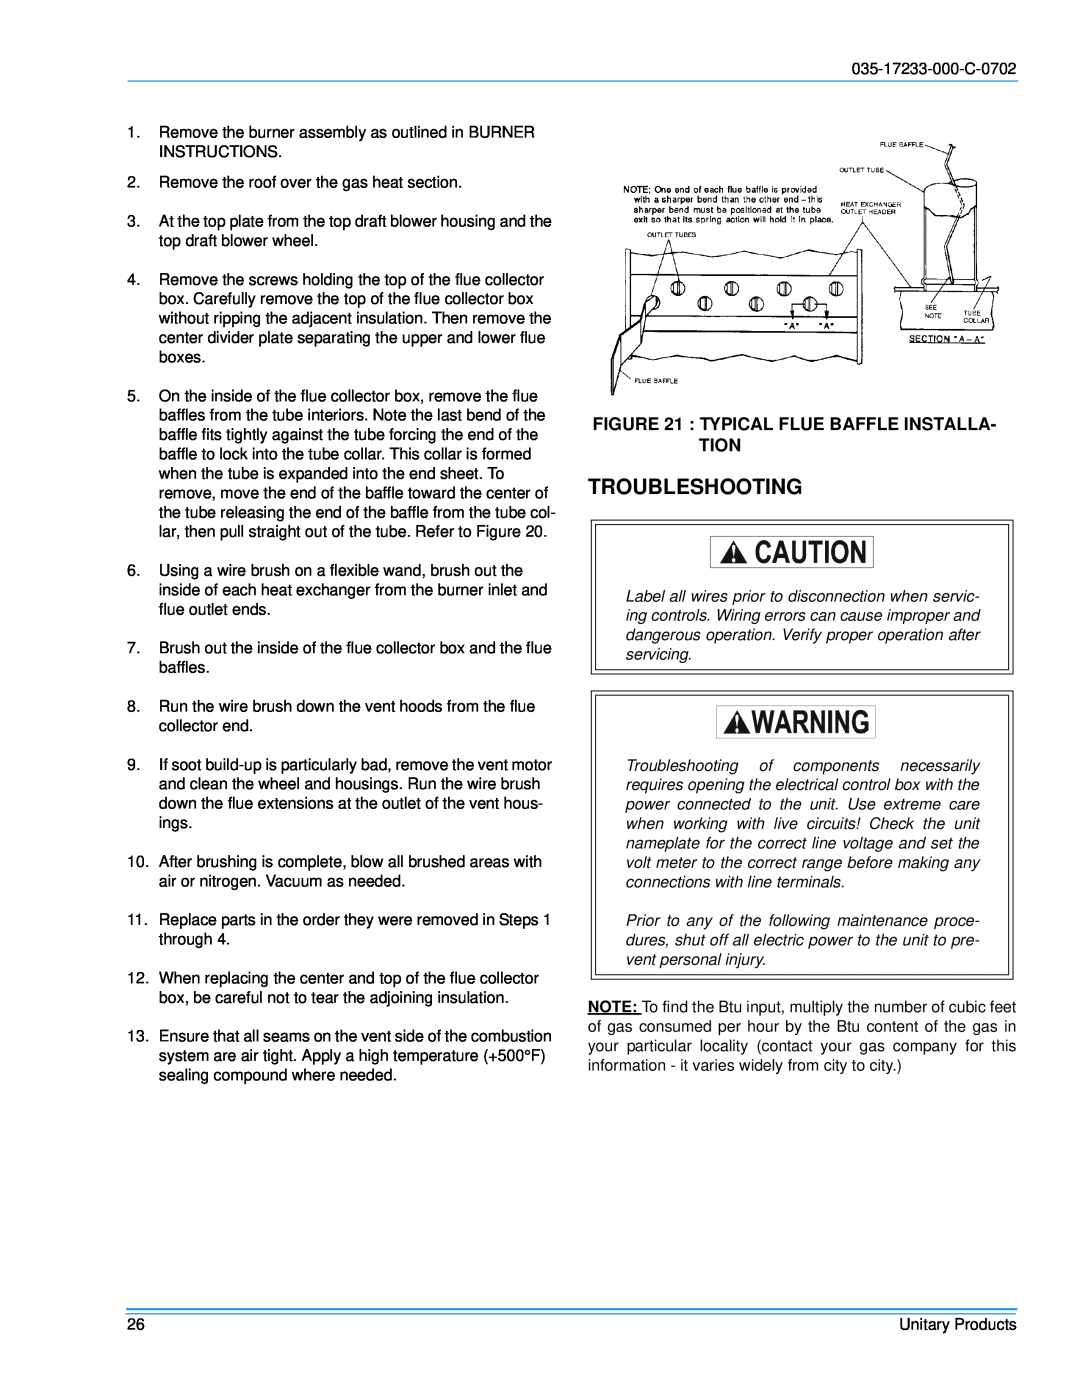 Energy Tech Laboratories DHG240, DHG180 installation instructions Troubleshooting, Typical Flue Baffle Installa- Tion 